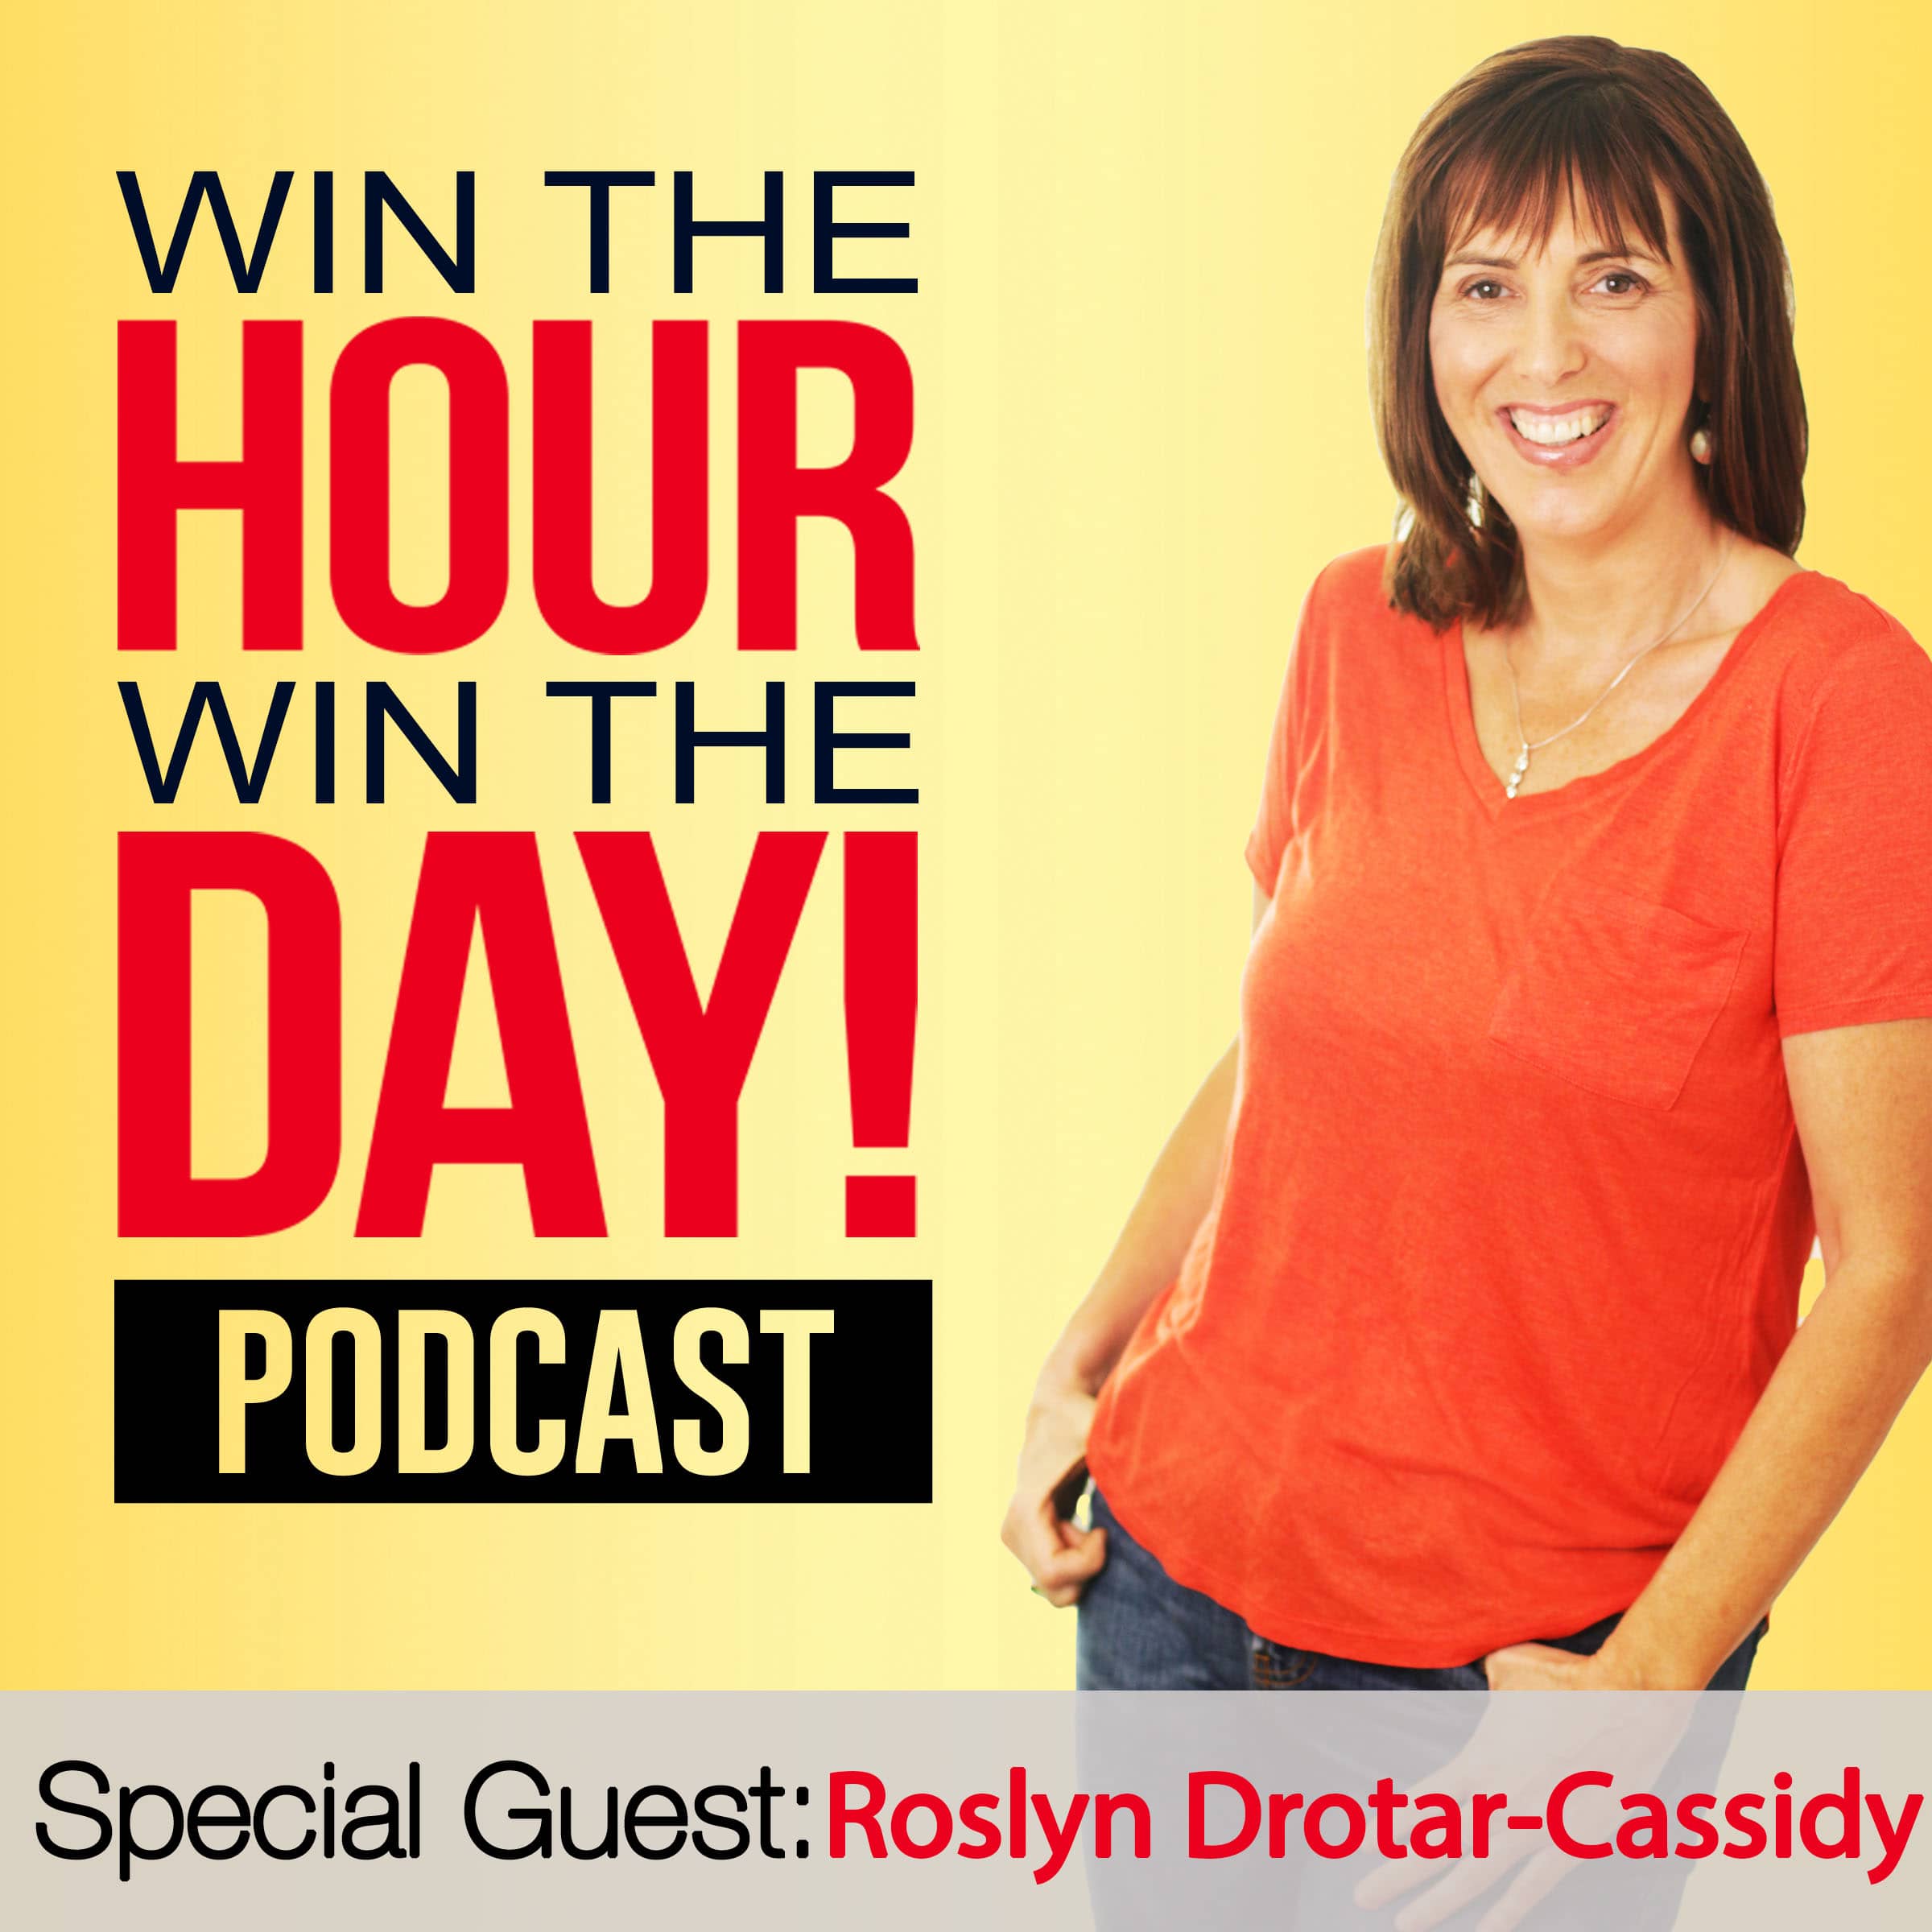 What Entrepreneurs Need To Know – Hiring! With Roslyn Drotar-Cassidy